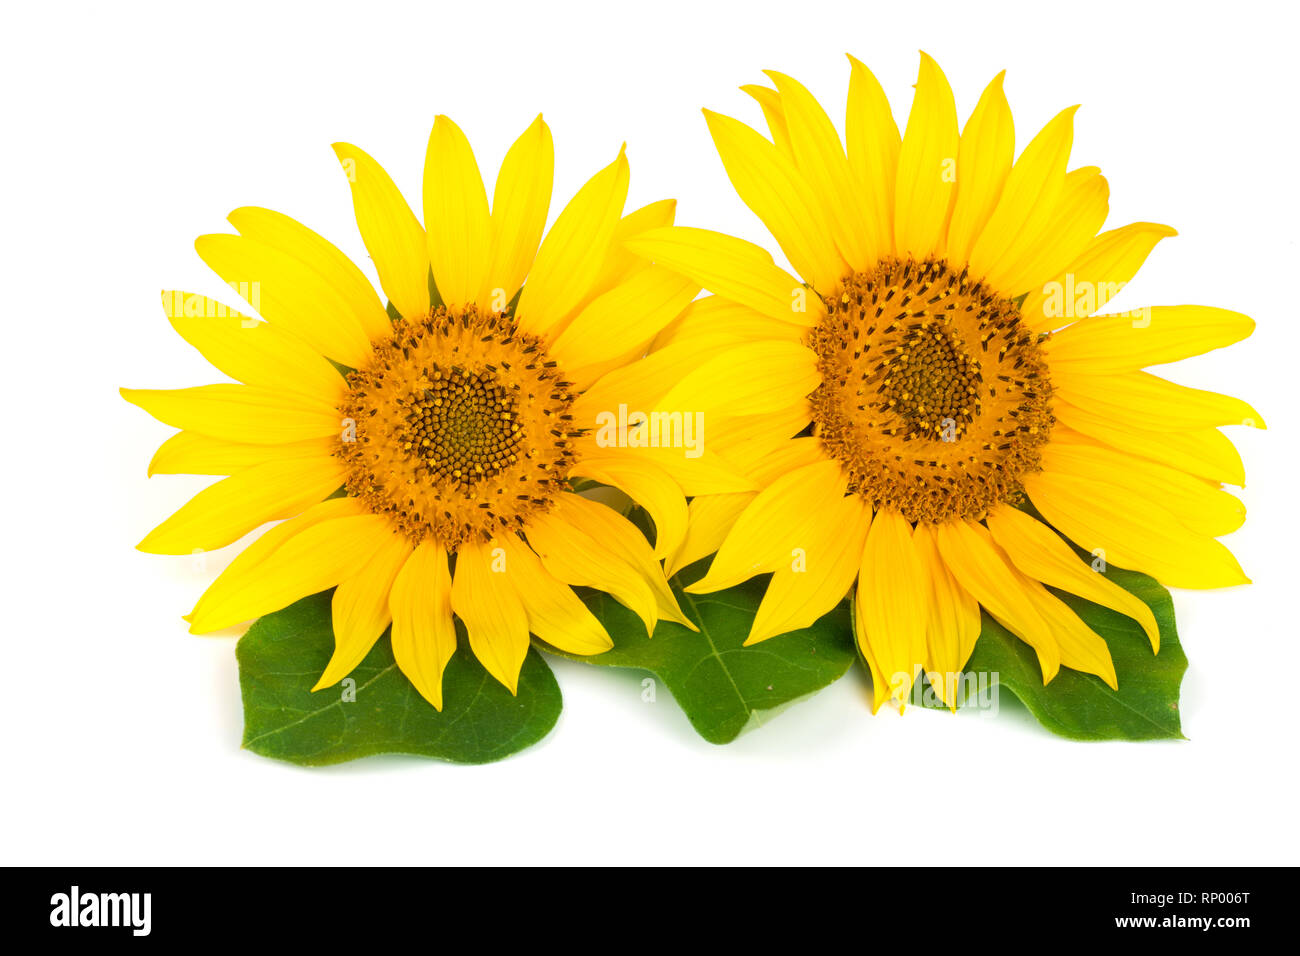 Two sunflowers with leaves isolated on white background. Stock Photo